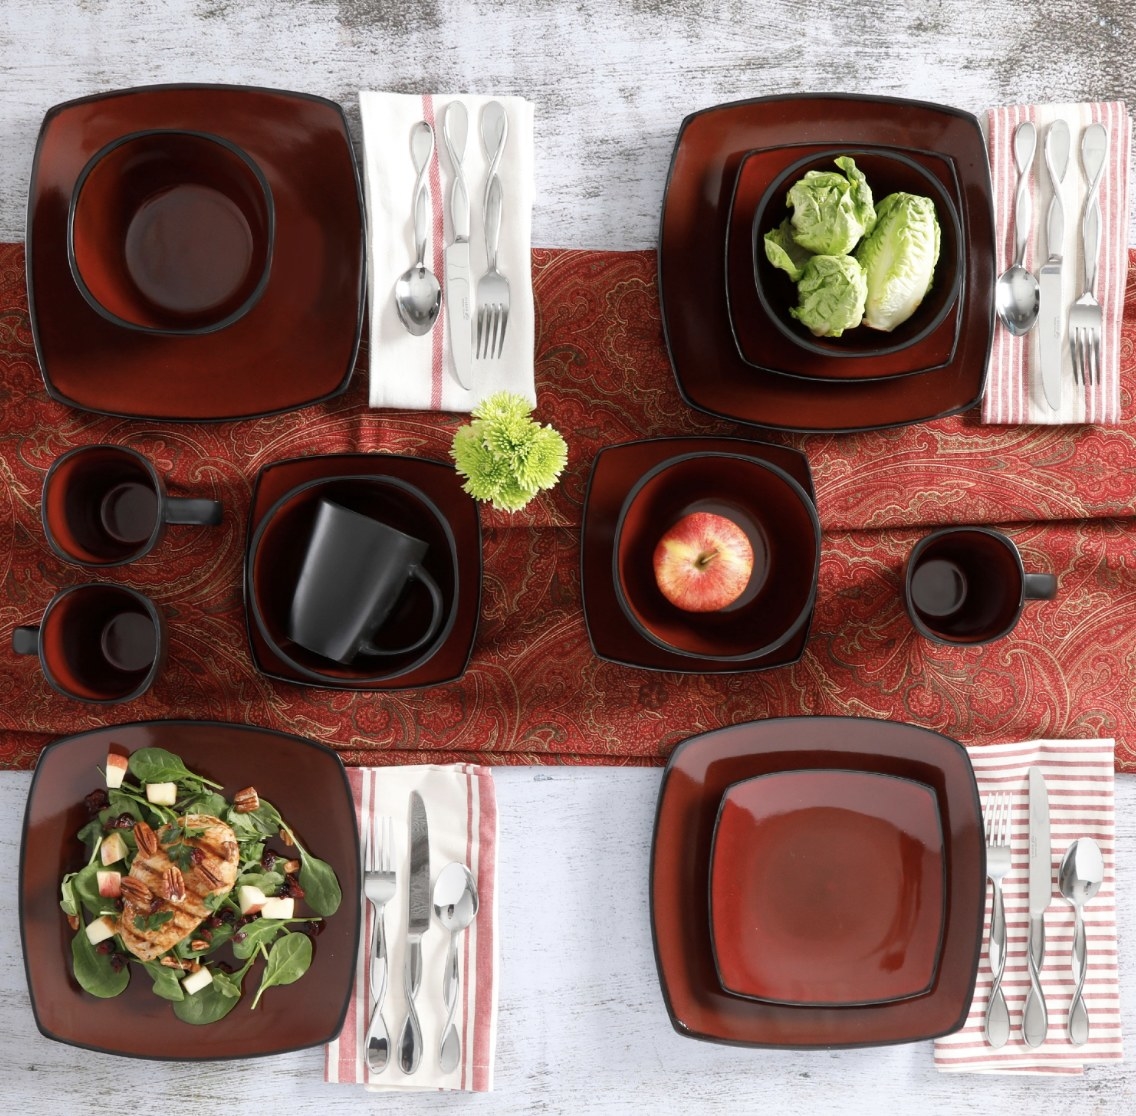 The deep red and black dinnerware set has four place settings and various foods